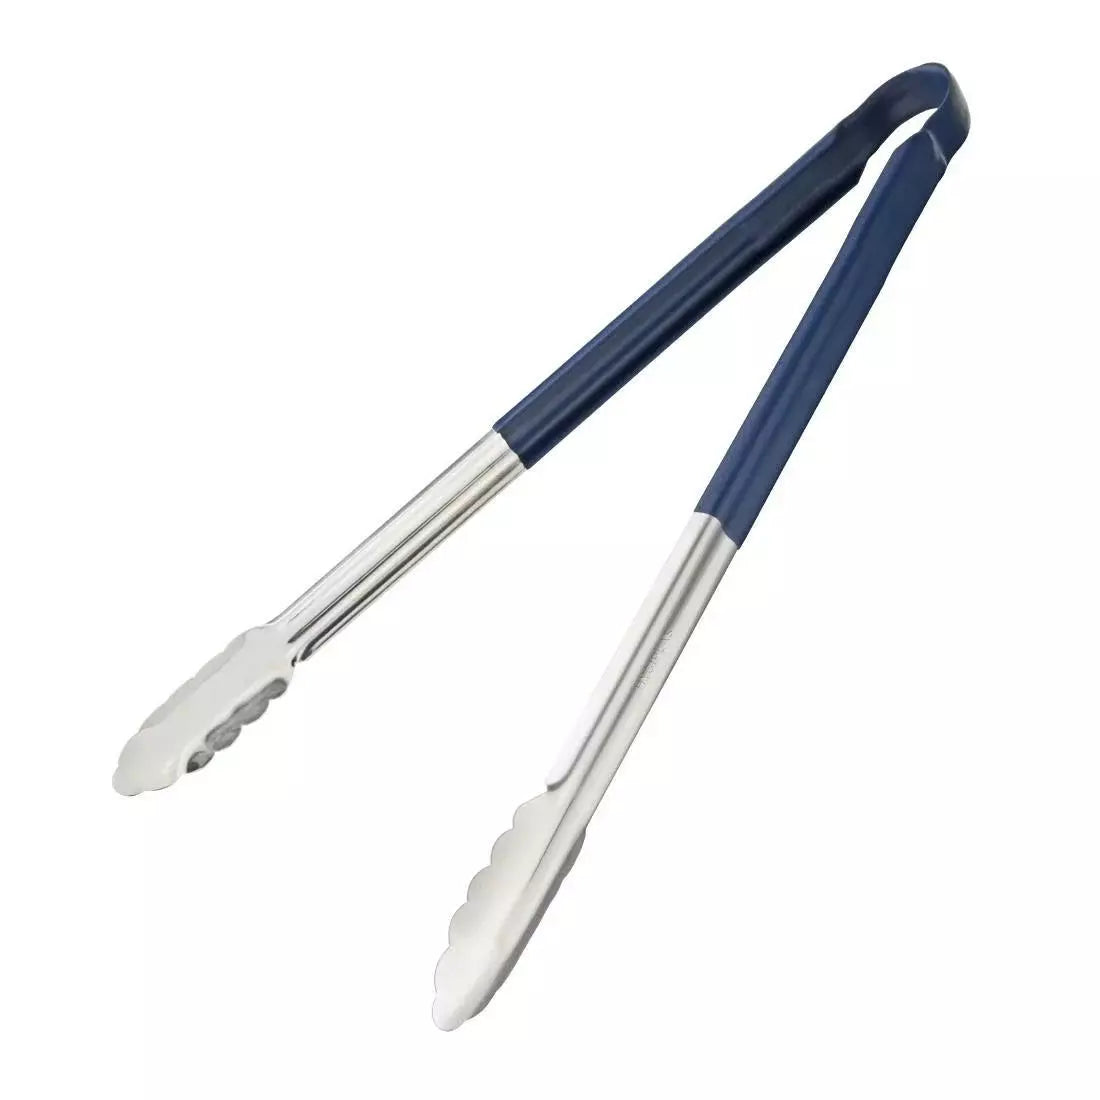 Hygiplas Colour Coded Blue Serving Tongs 405mm